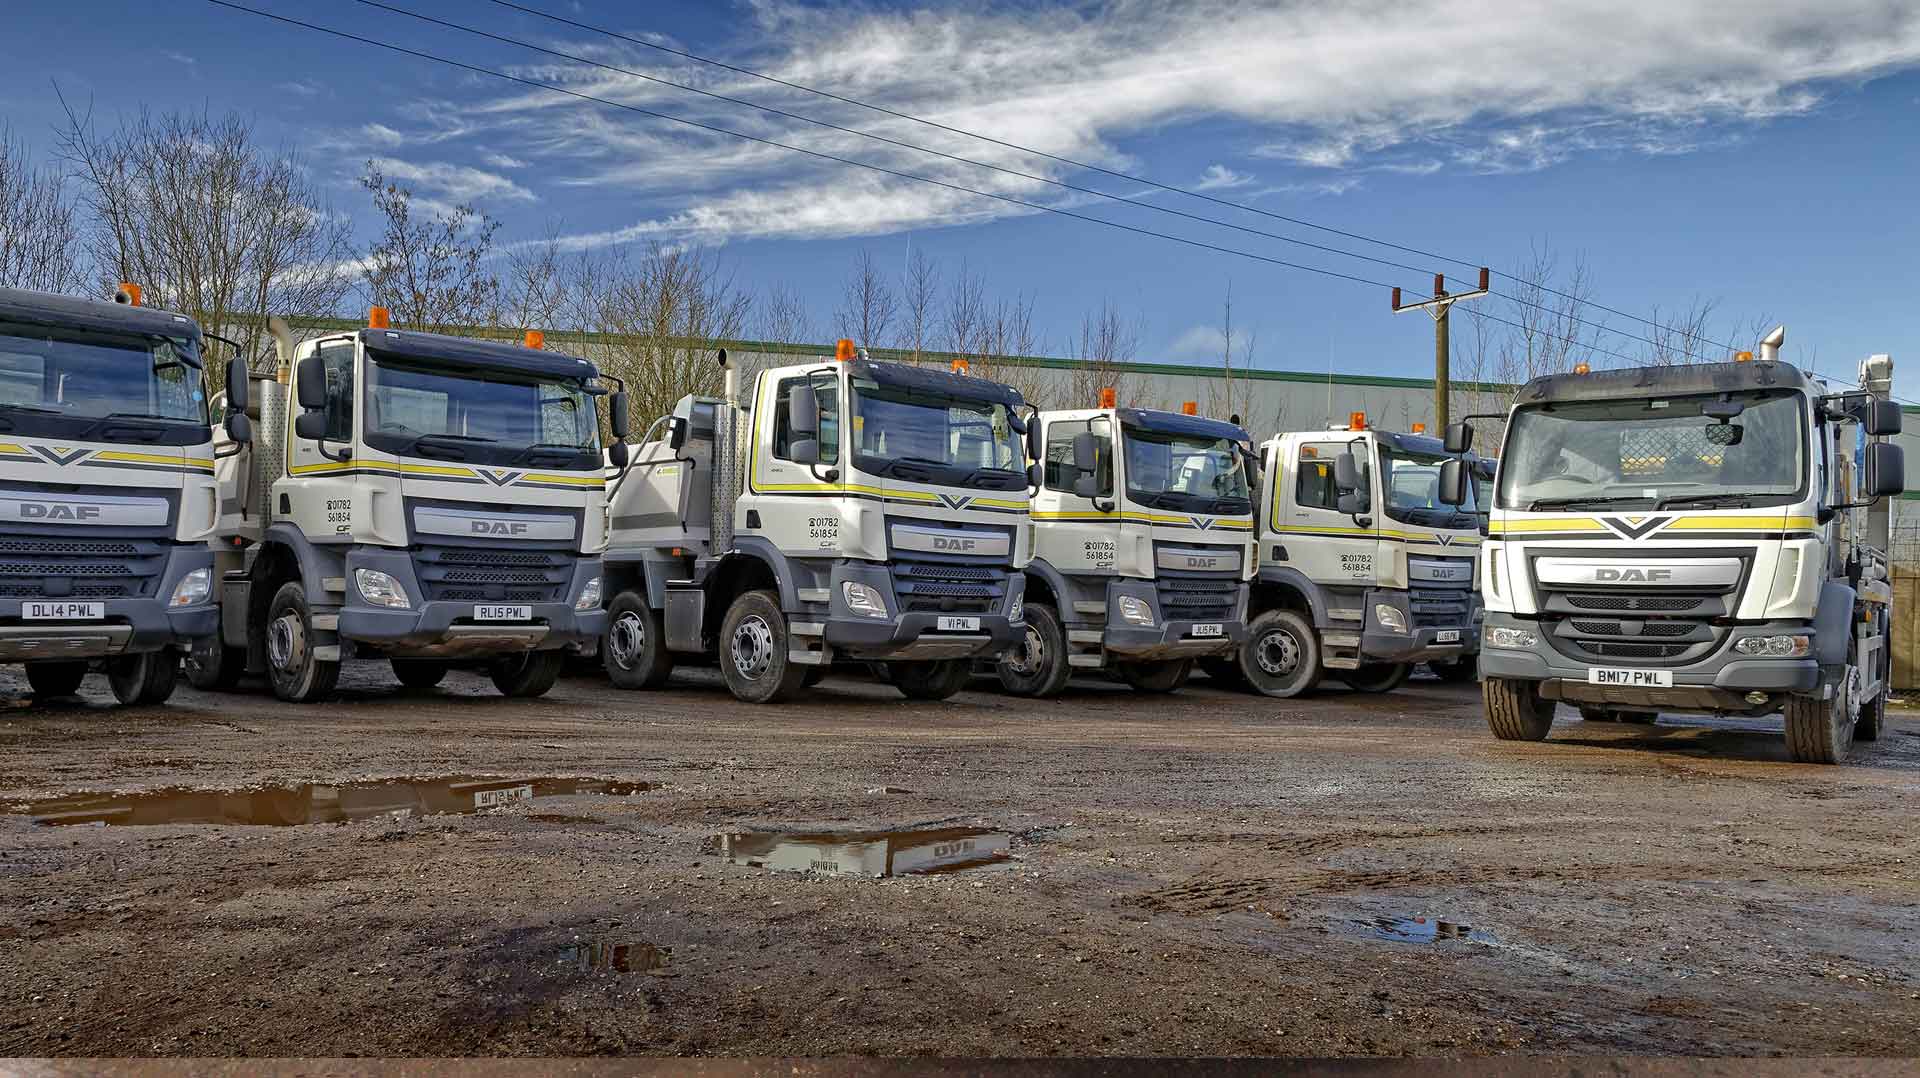 Potteries Waste 8 Wheel Tipper Hire Stoke on Trent